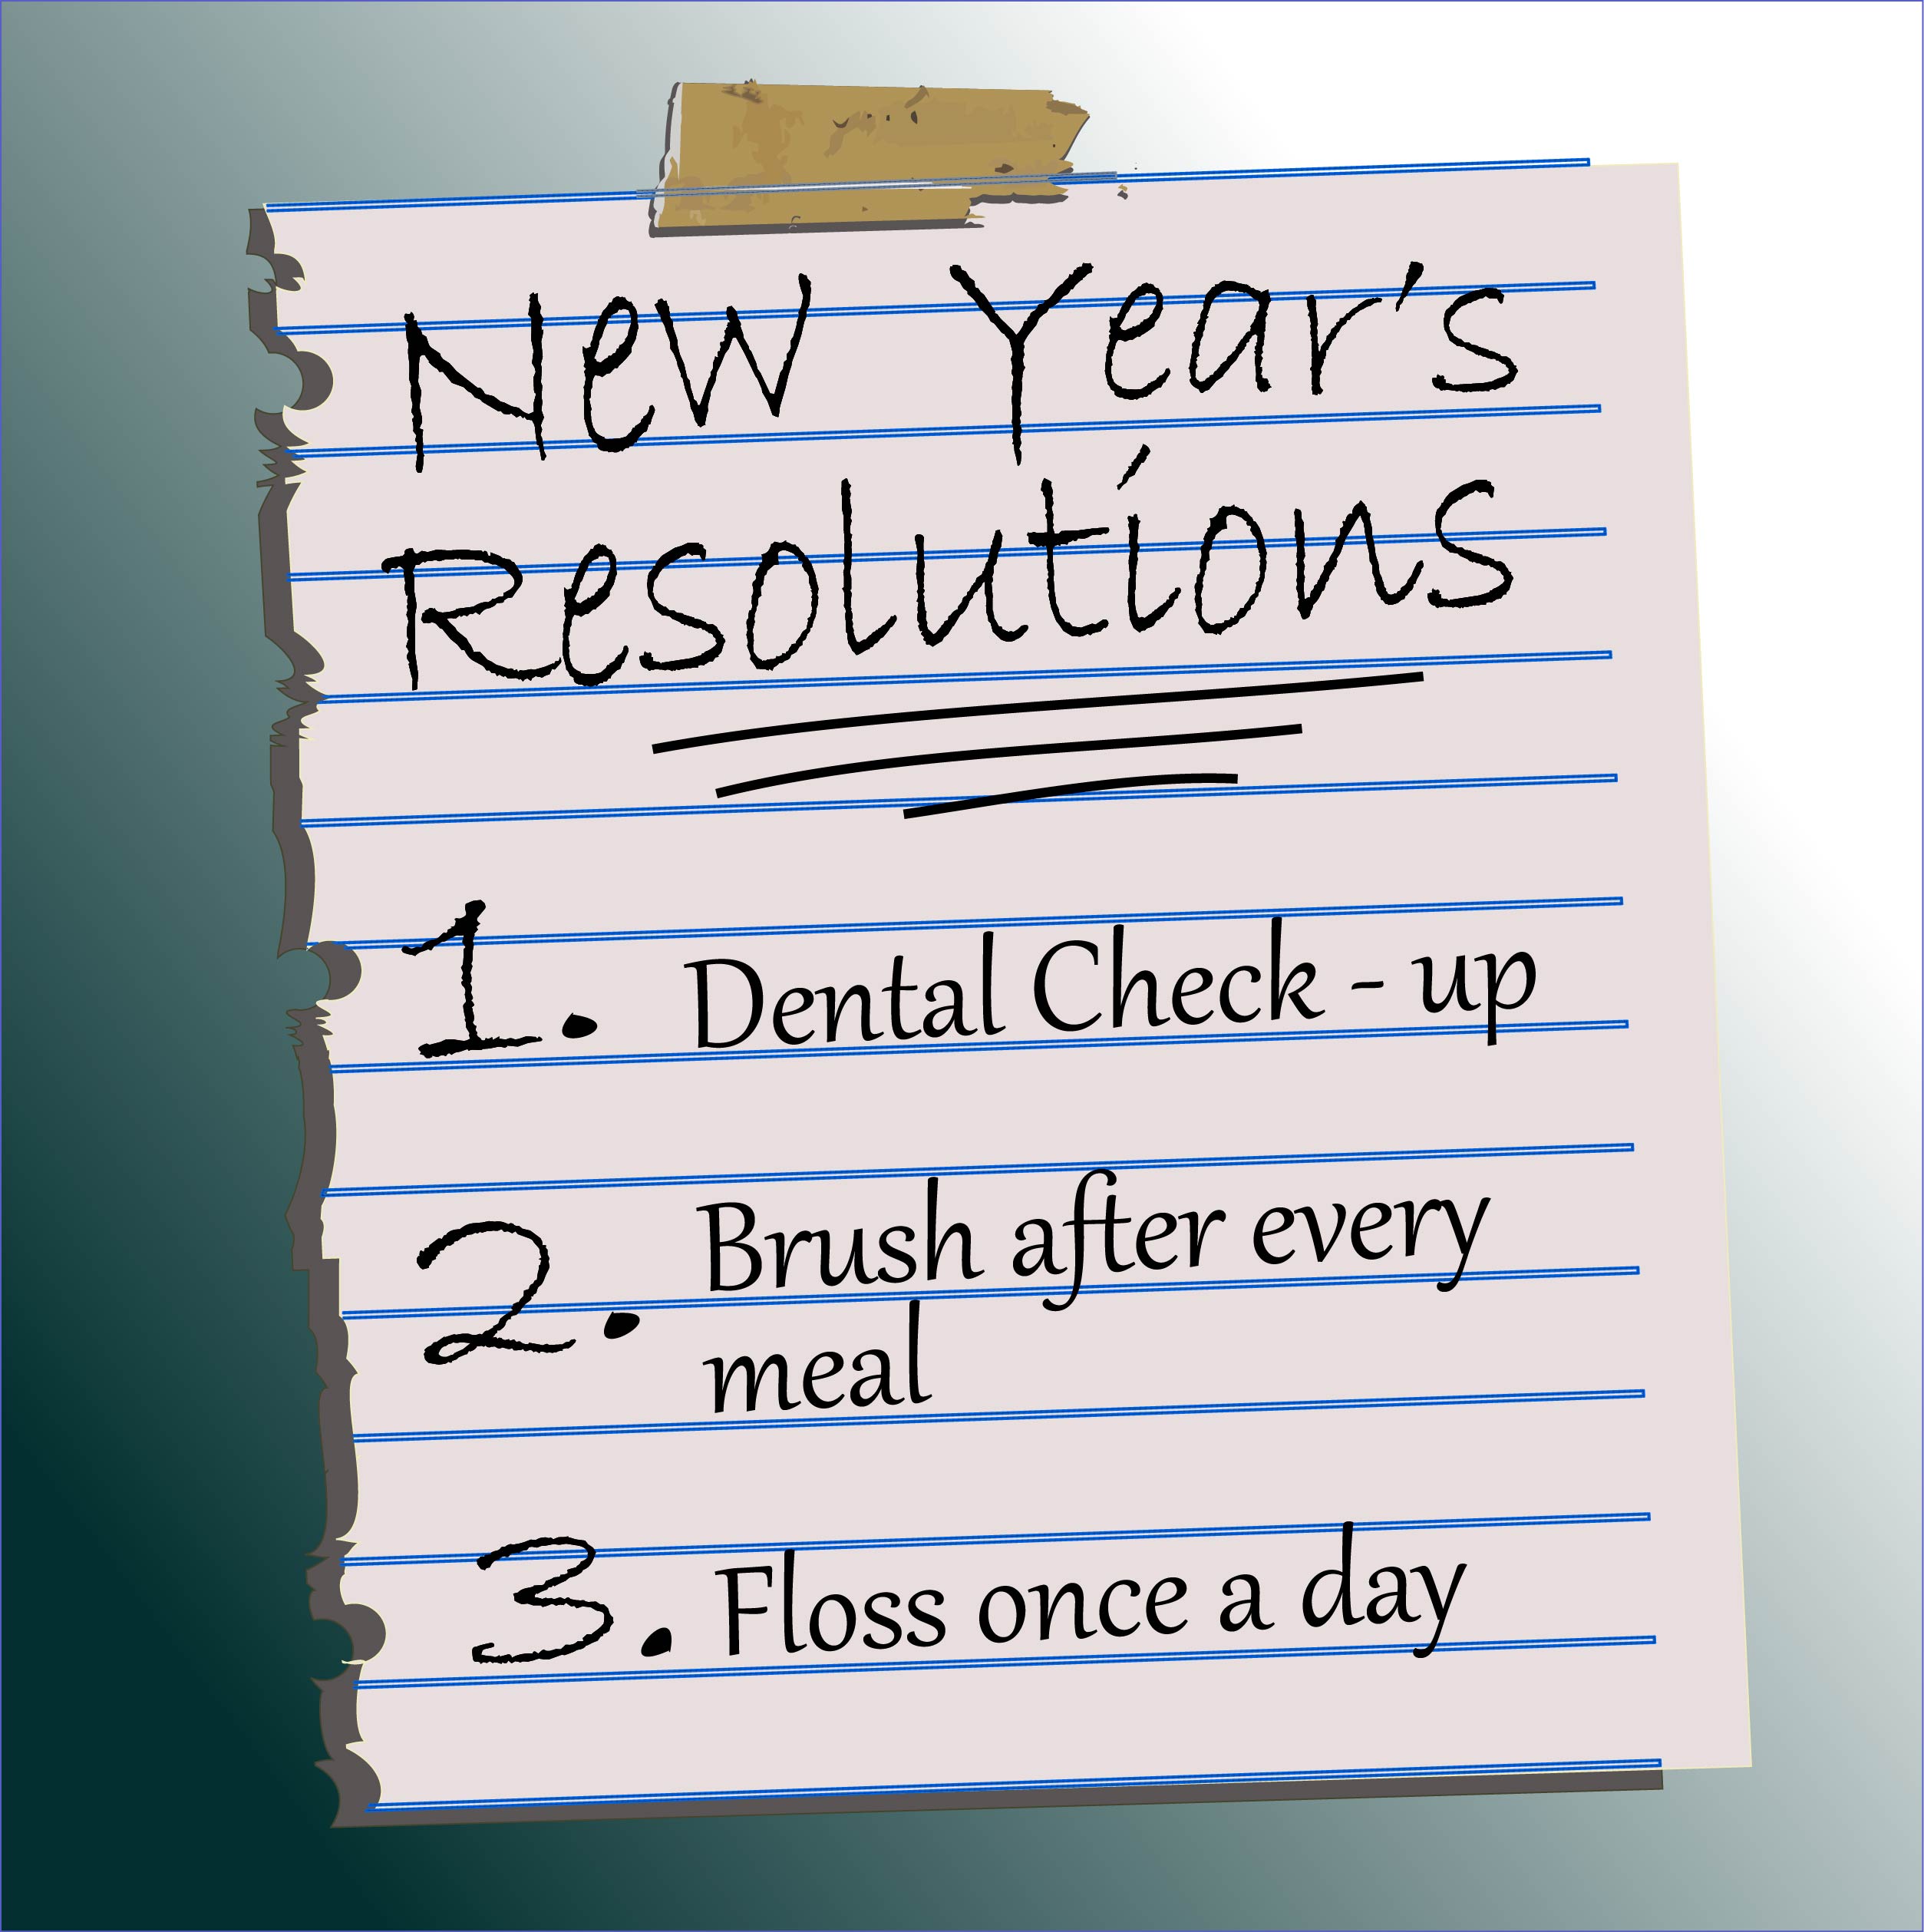 New Year Resolutions for a Healthy Smile